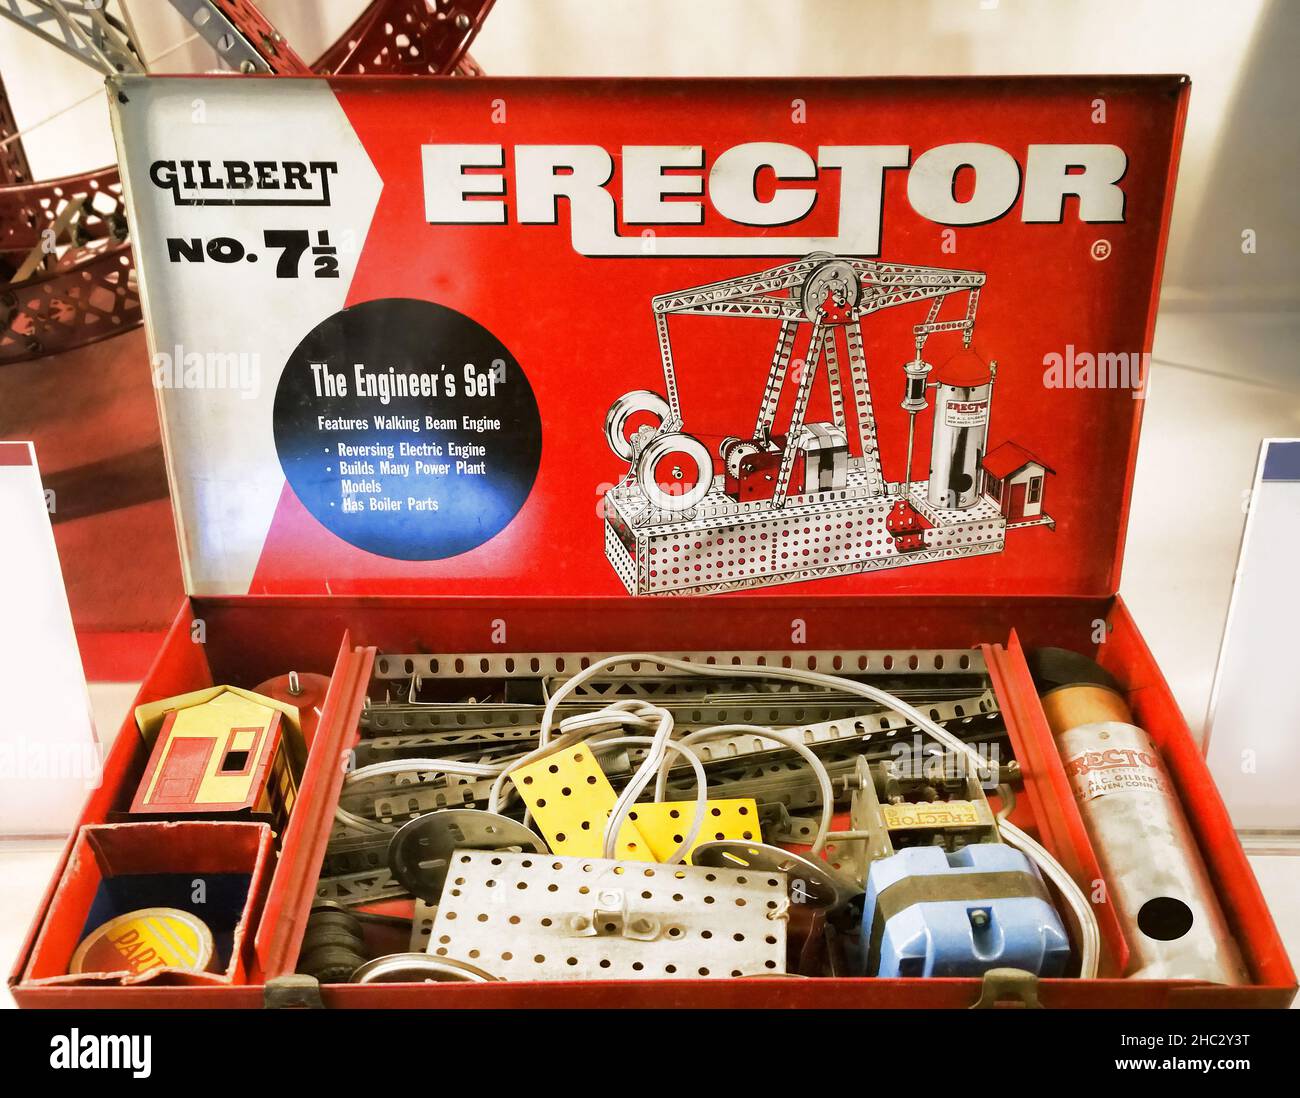 Rochester, New York, USA. December 16, 2021. Classic Erector Set, circa 1913, invented by Alfred Carlton Gilbert, on display at the Strong National Mu Stock Photo